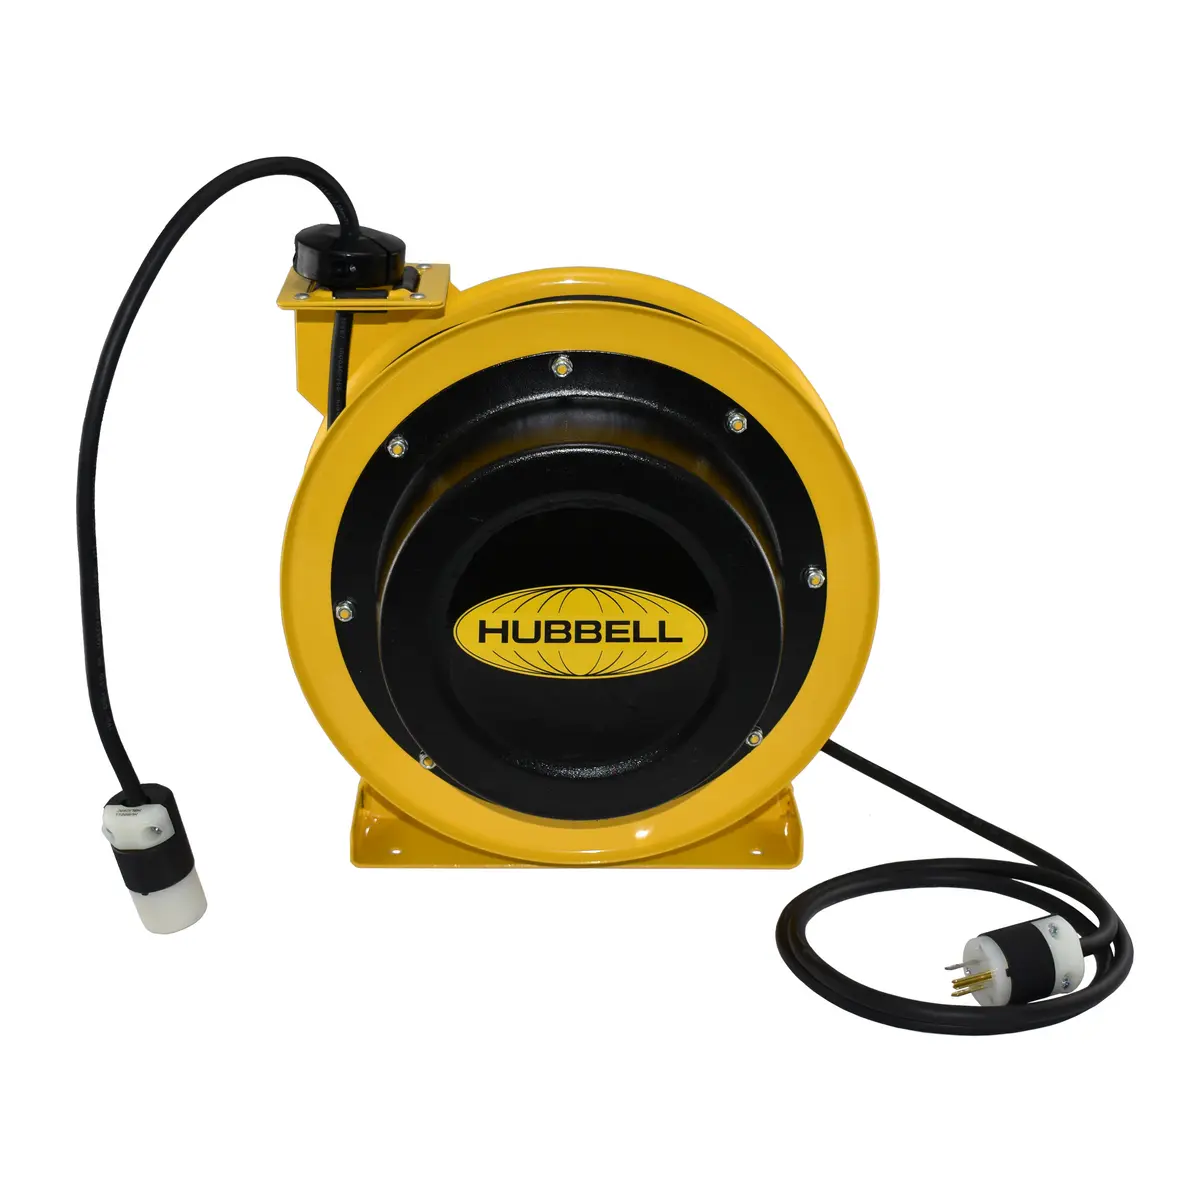 BIM objects - Free download! Cord and Cable Reels, Industrial Cord Reel,  With HBL5269C, 45' 12/3, Yellow - HBL45123C